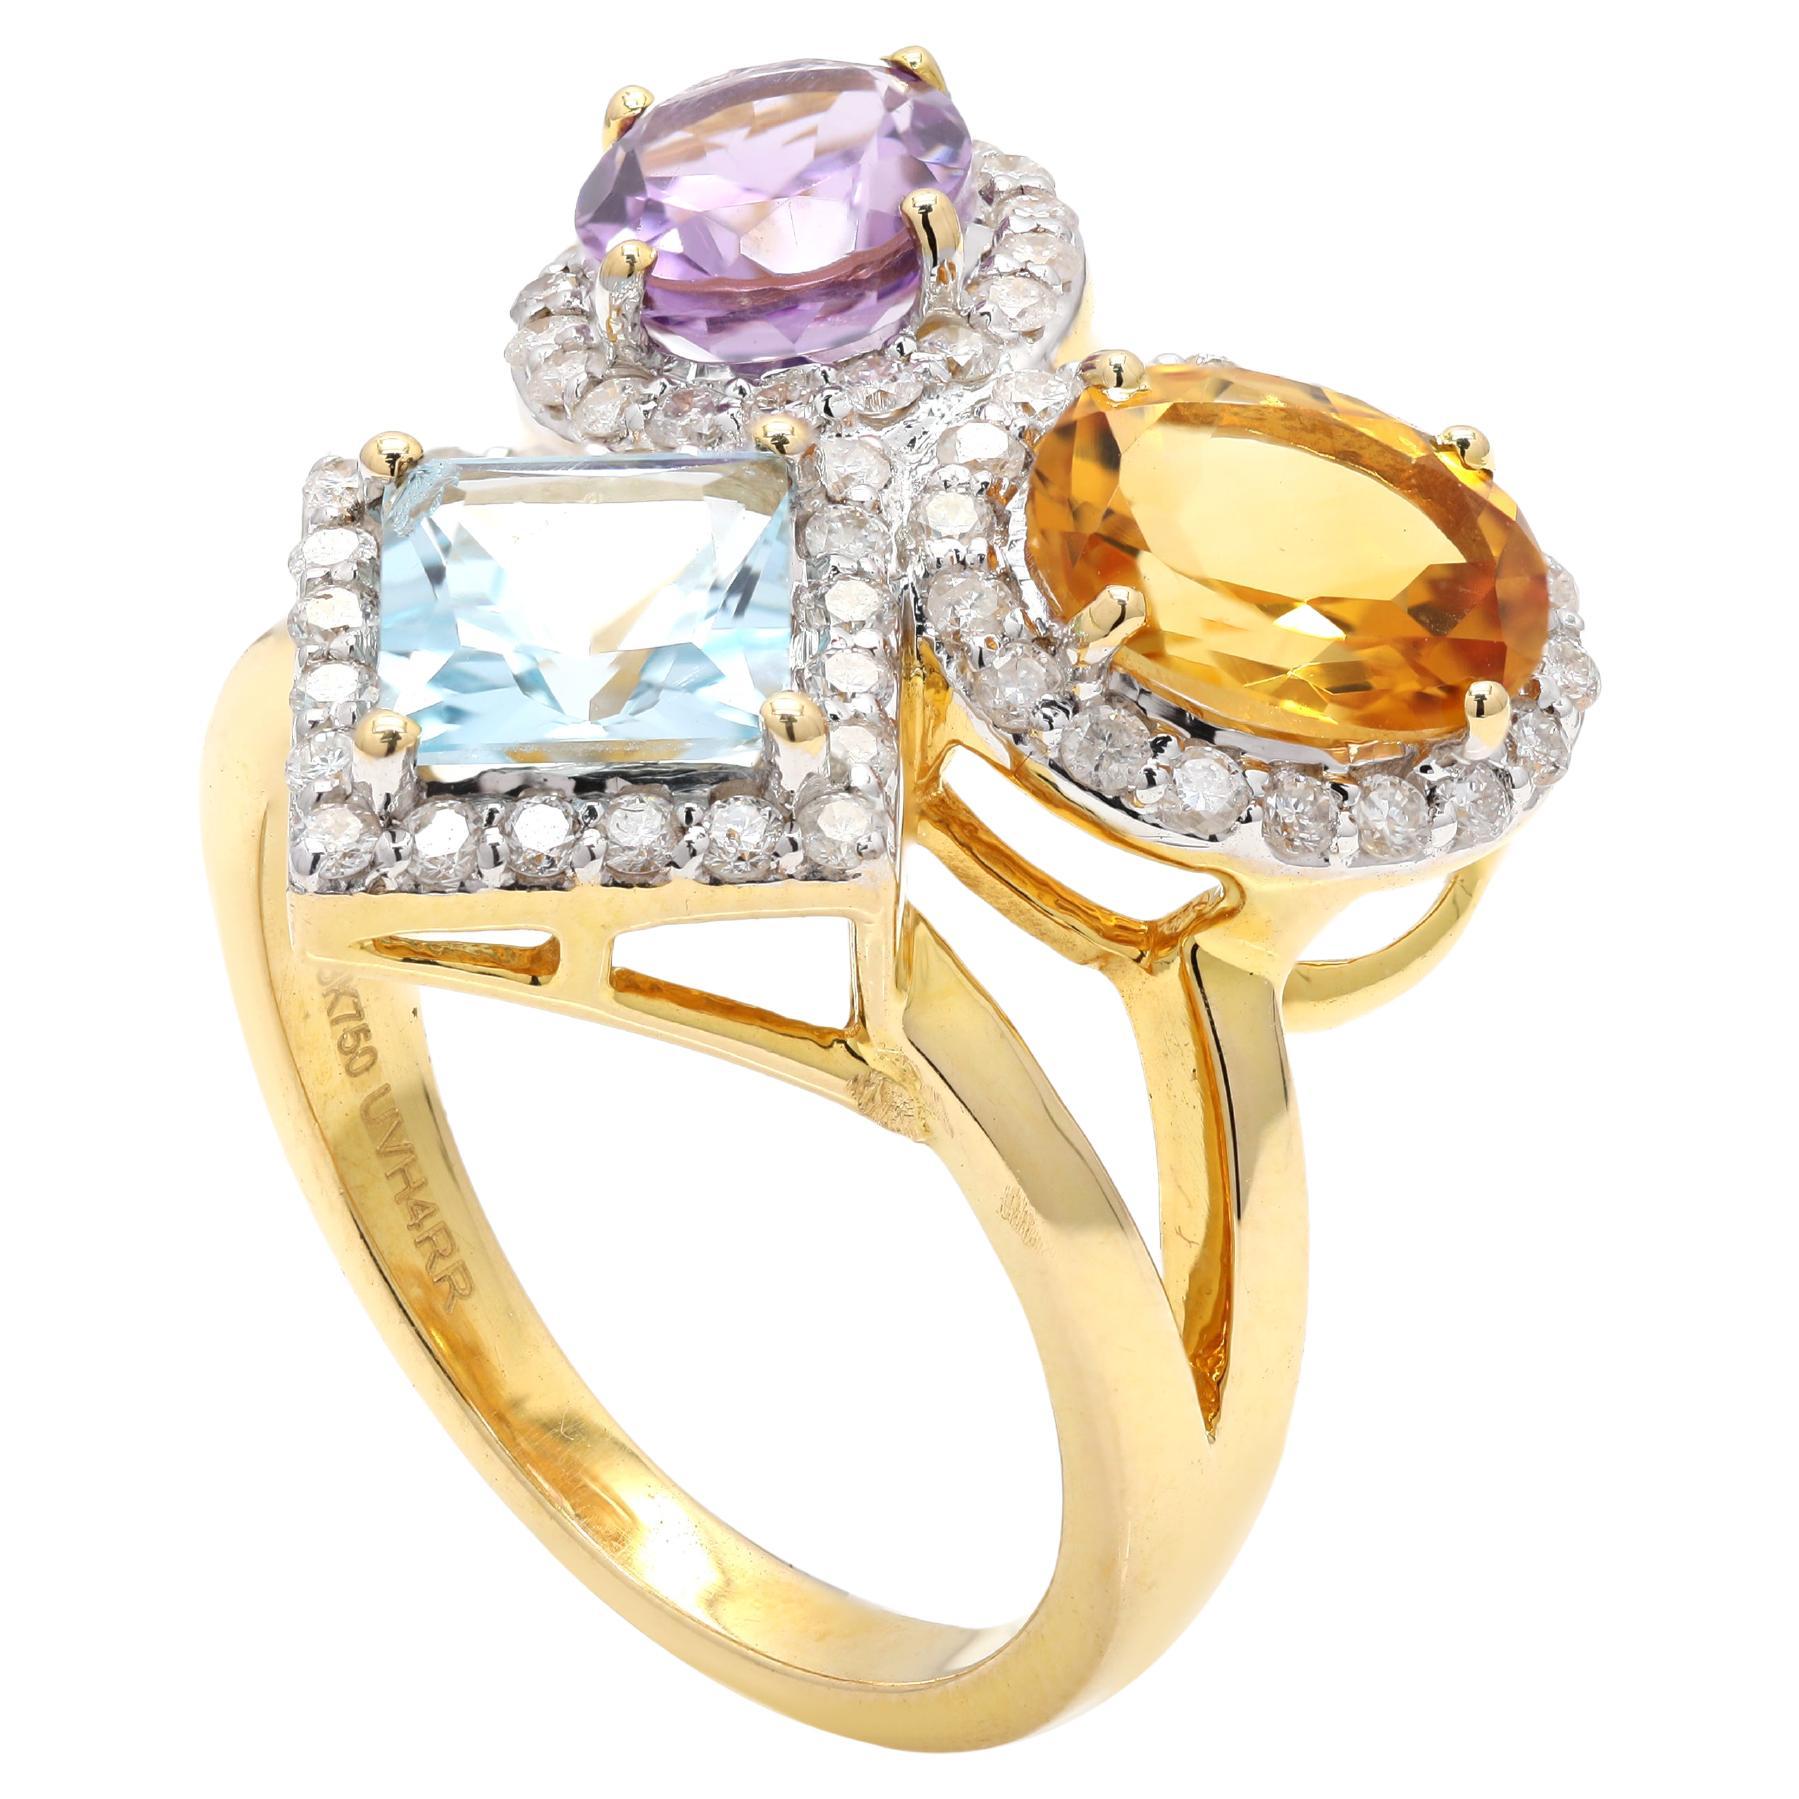 For Sale:  Statement 7.23ct Semi Precious Cocktail Ring in 18k Yellow Gold with Diamonds